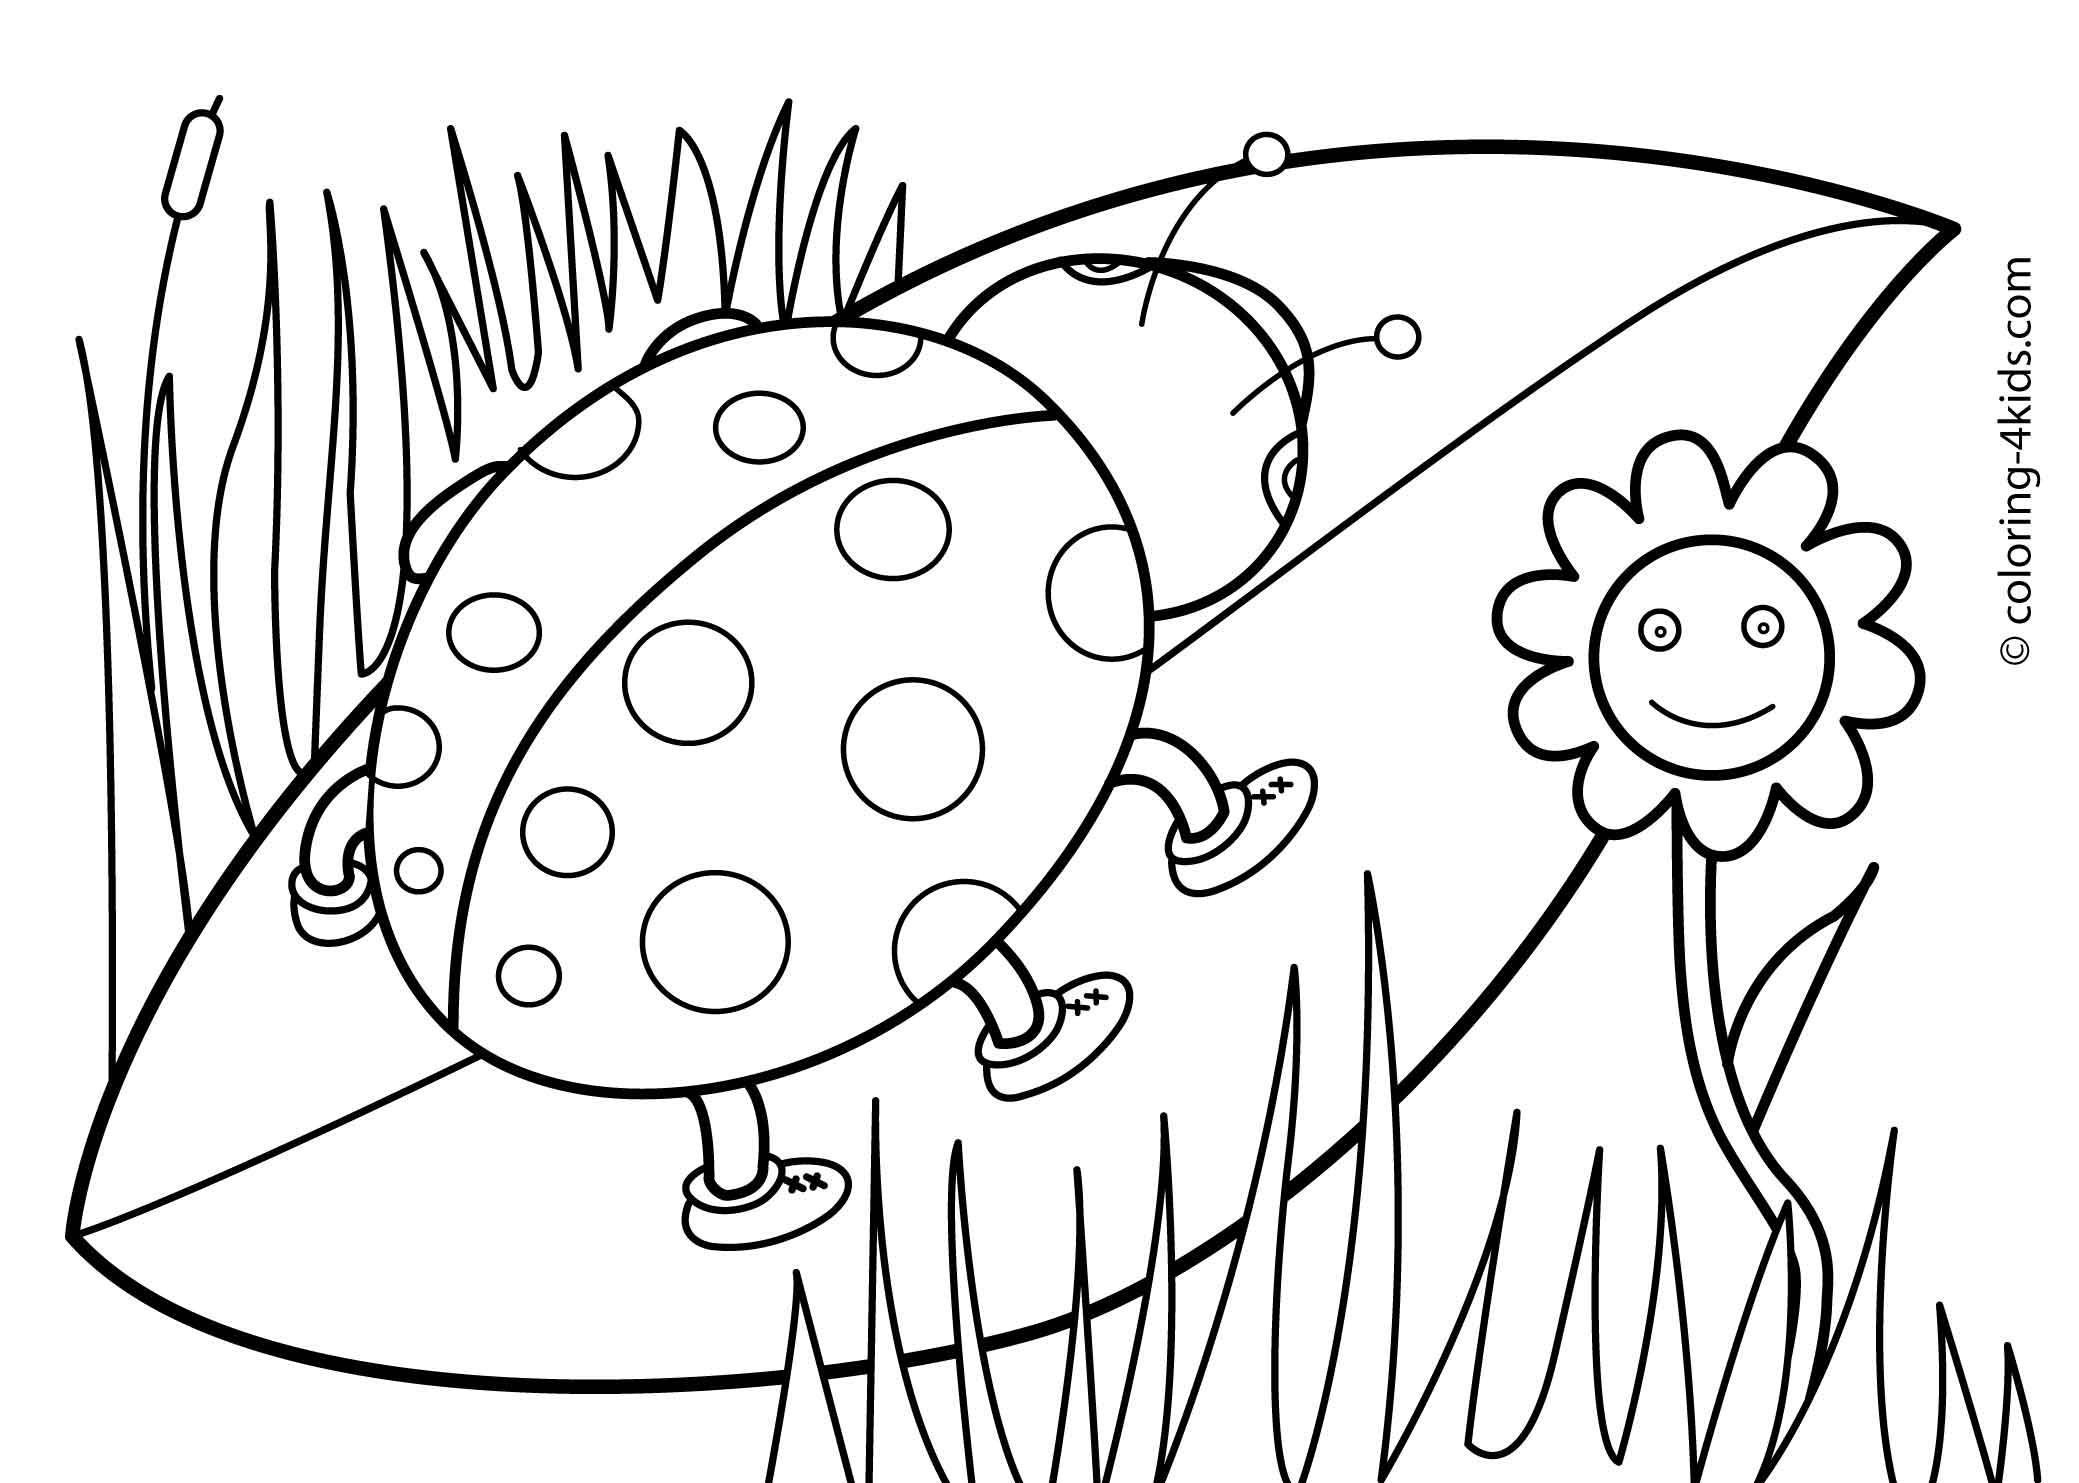 Free Printable Spring Coloring Pages Kindergarten Download Free Printable Spring Coloring Pages Kindergarten Png Images Free Cliparts On Clipart Library